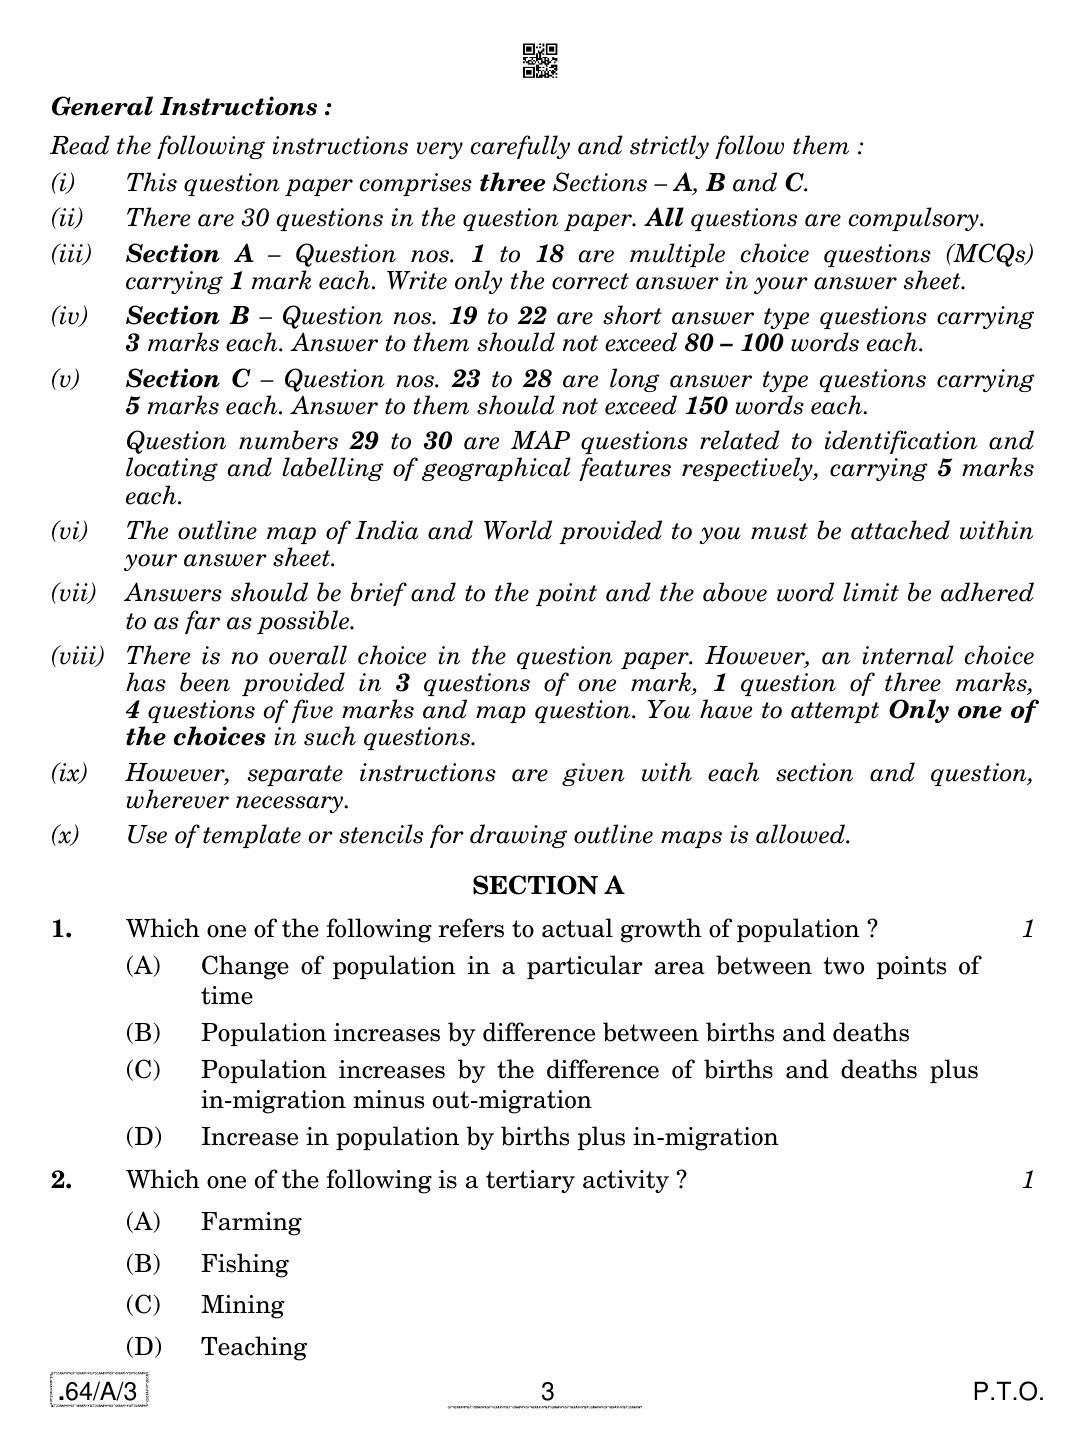 CBSE Class 12 64-C-3 - Geography 2020 Compartment Question Paper - Page 3